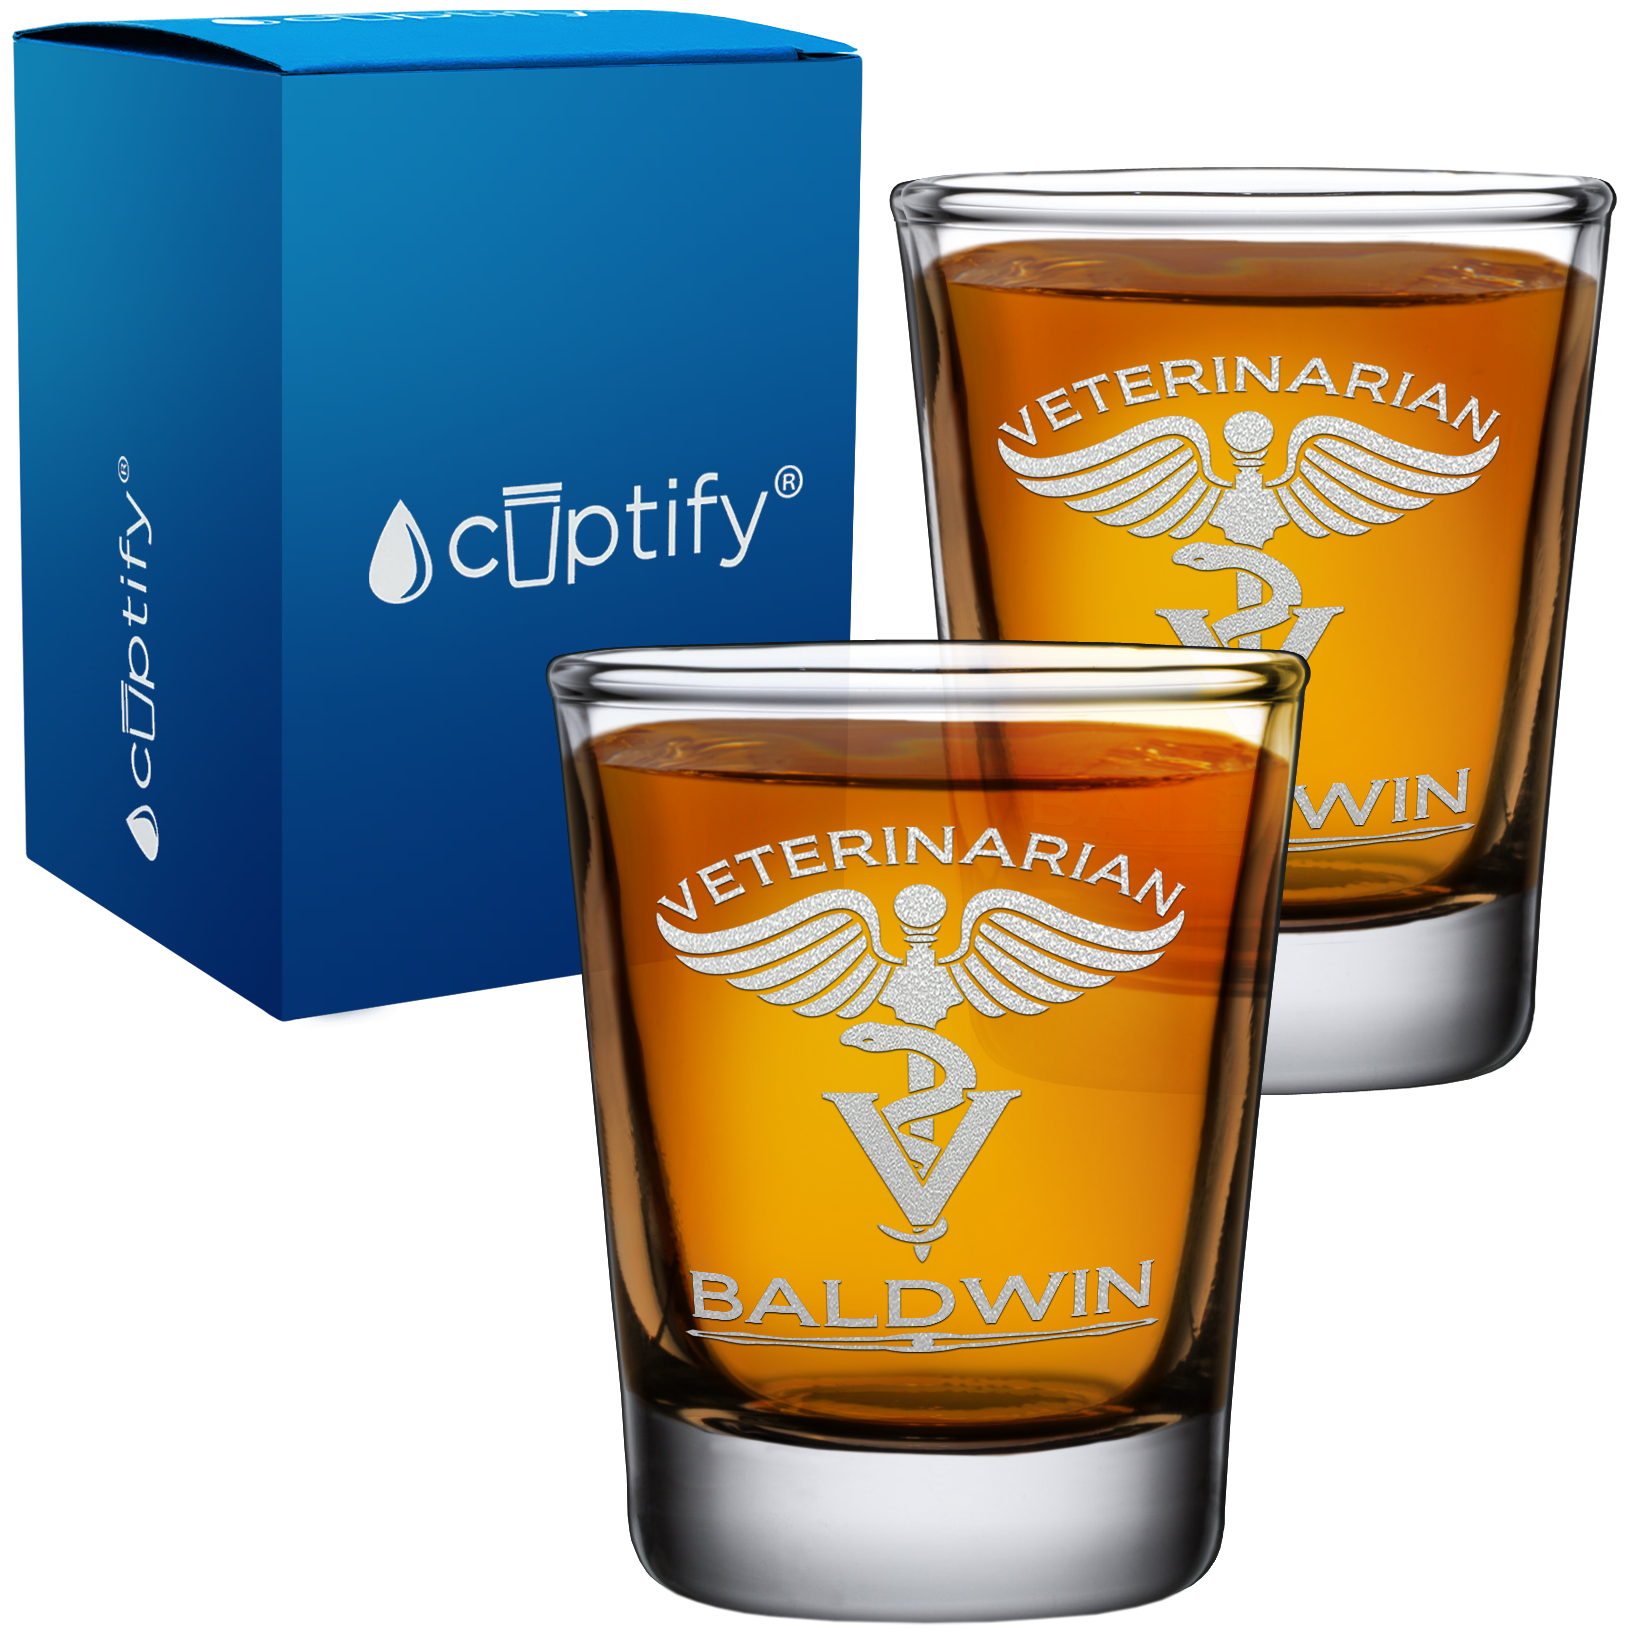 Personalized Veterinarian on 2oz Shot Glasses - Set of 2